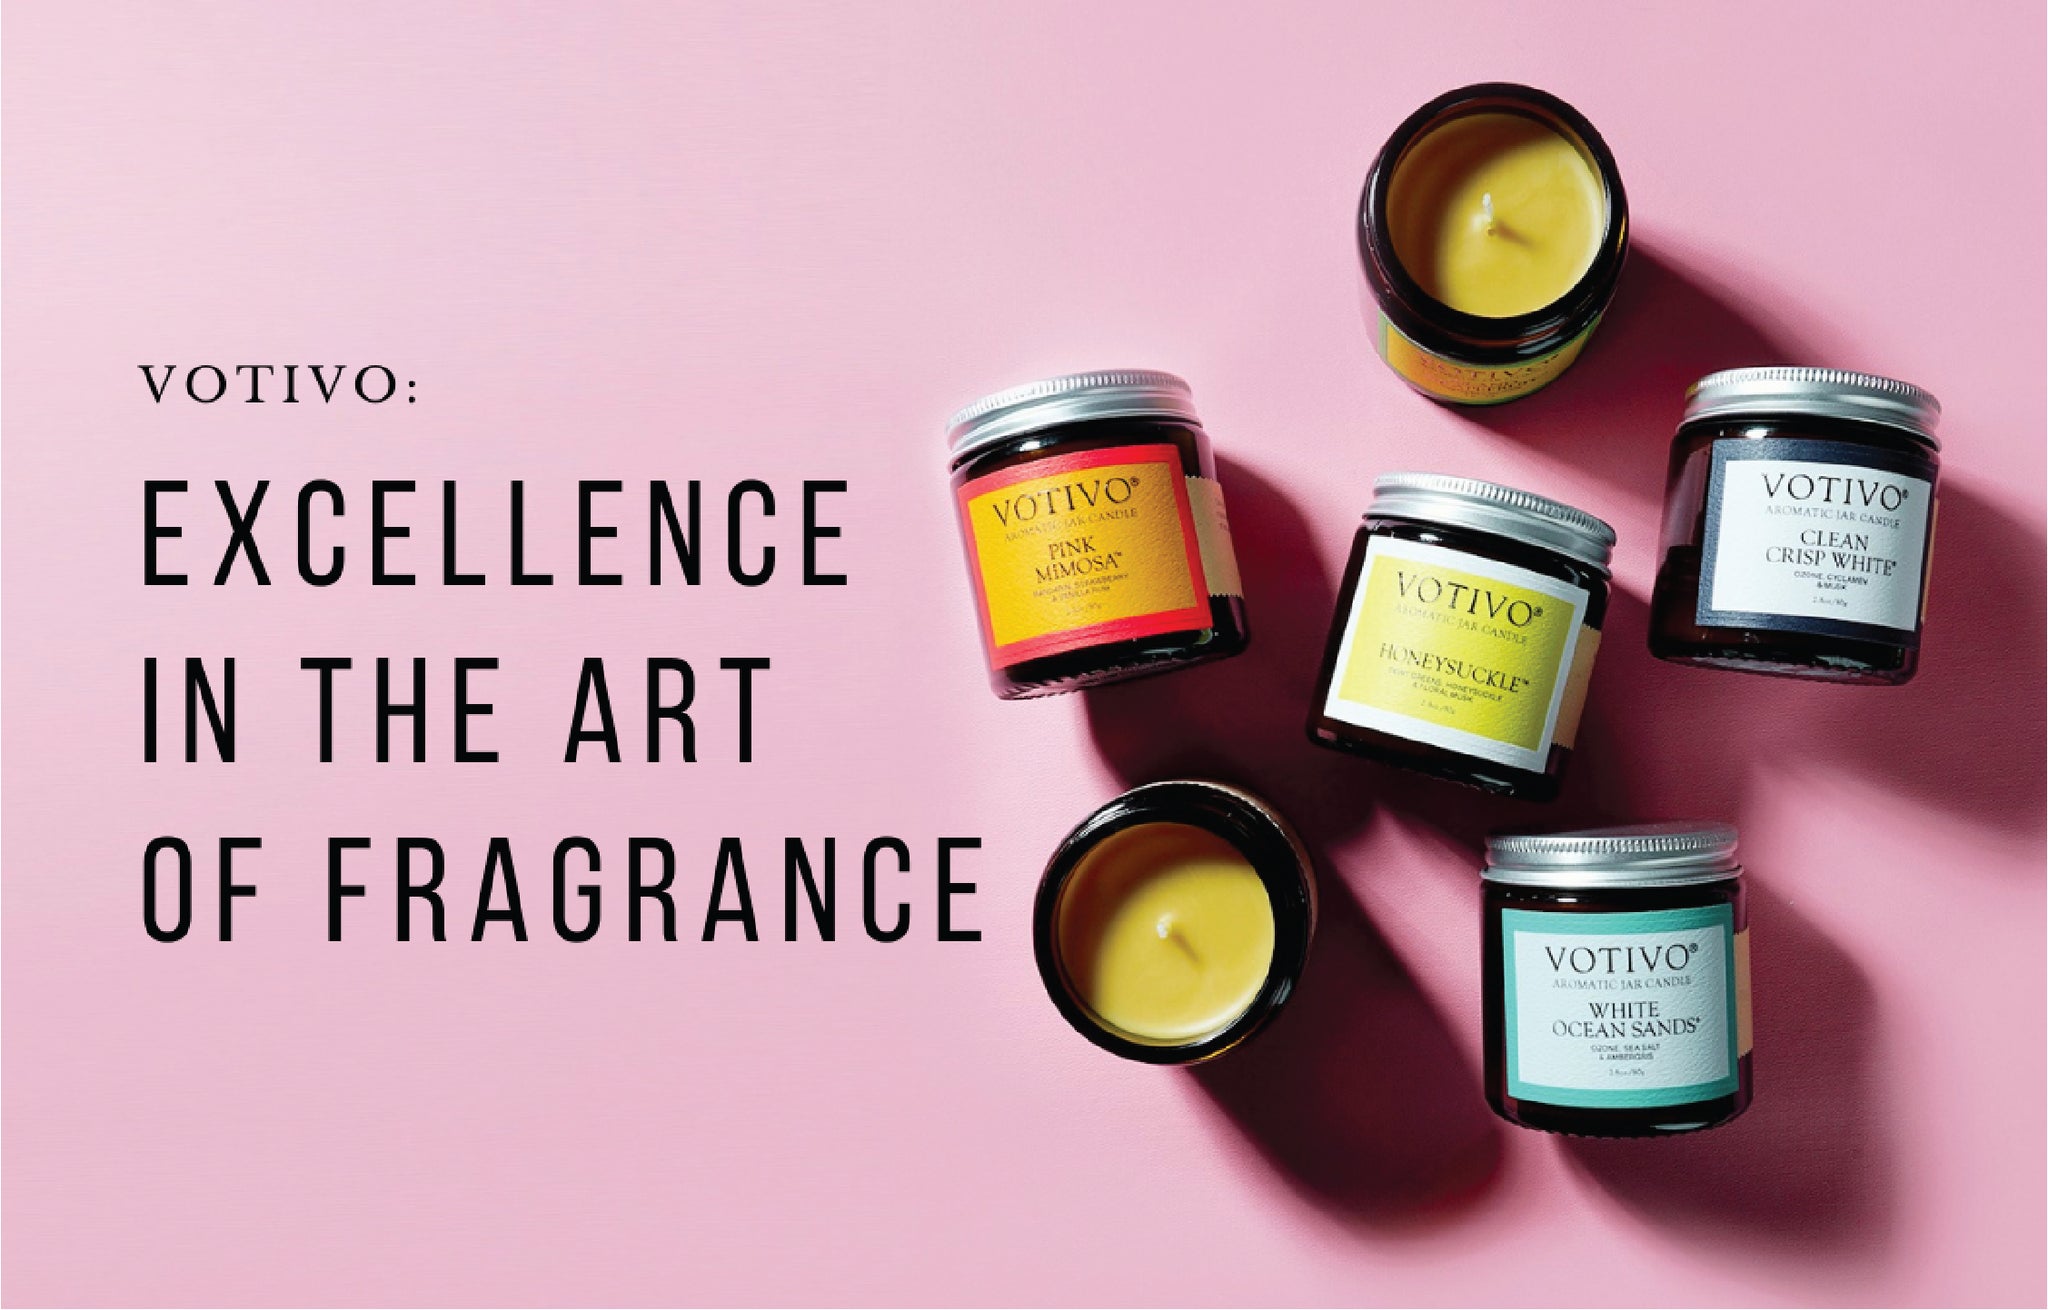 VOTIVO: EXCELLENCE IN THE ART OF FRAGRANCE